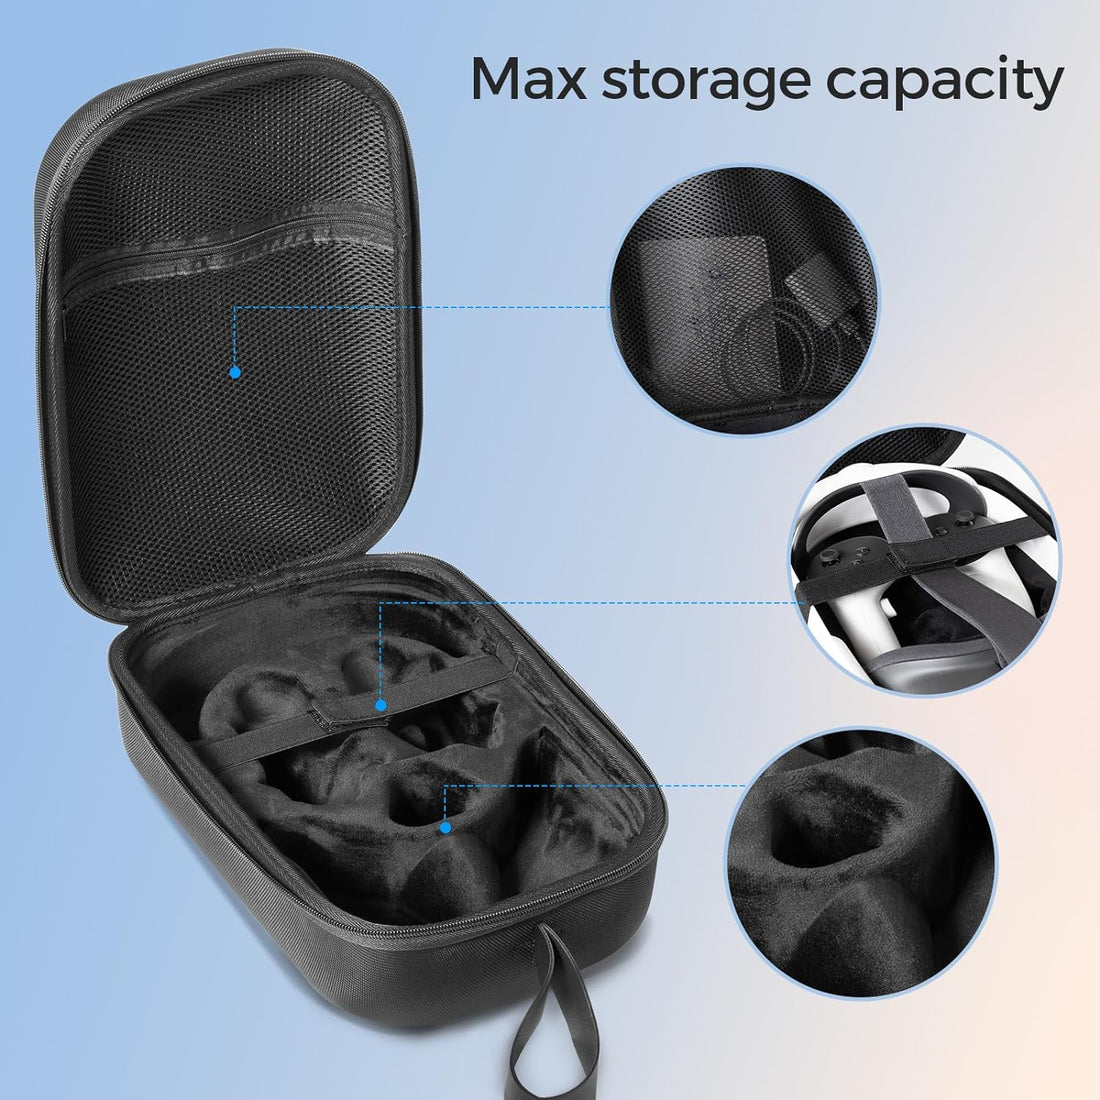 CoBak Hard Carrying Case for Meta Quest 3 - Compact design, Multiple Compartments for Elite Version VR Headset, Controllers and Accessories, Travel with Protection, Black